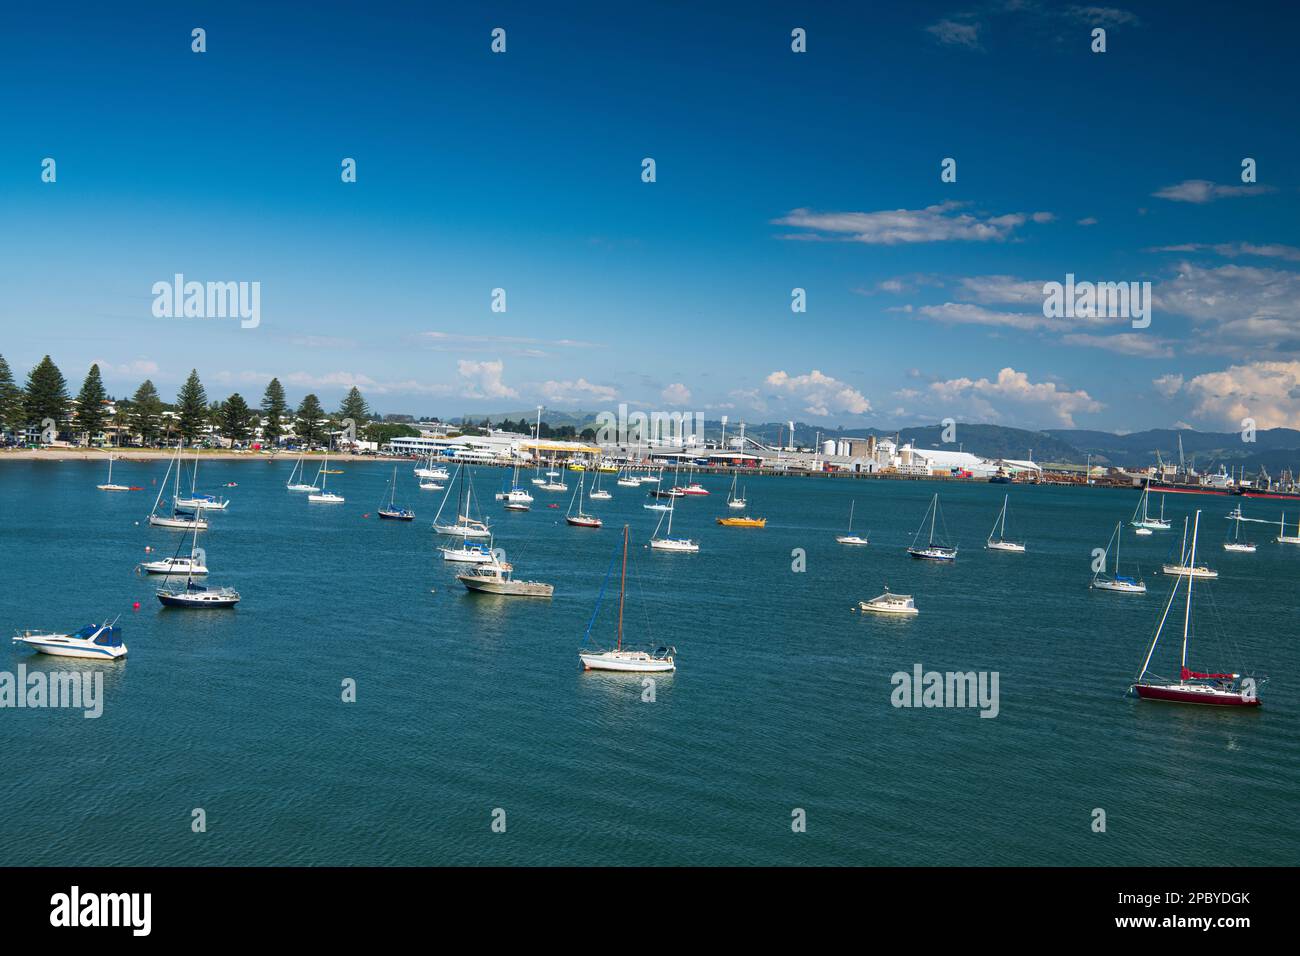 Pilot Bay viewed from the base of Mount Maunganui. Boats are anchored on a calm summer afternoon. Stock Photo